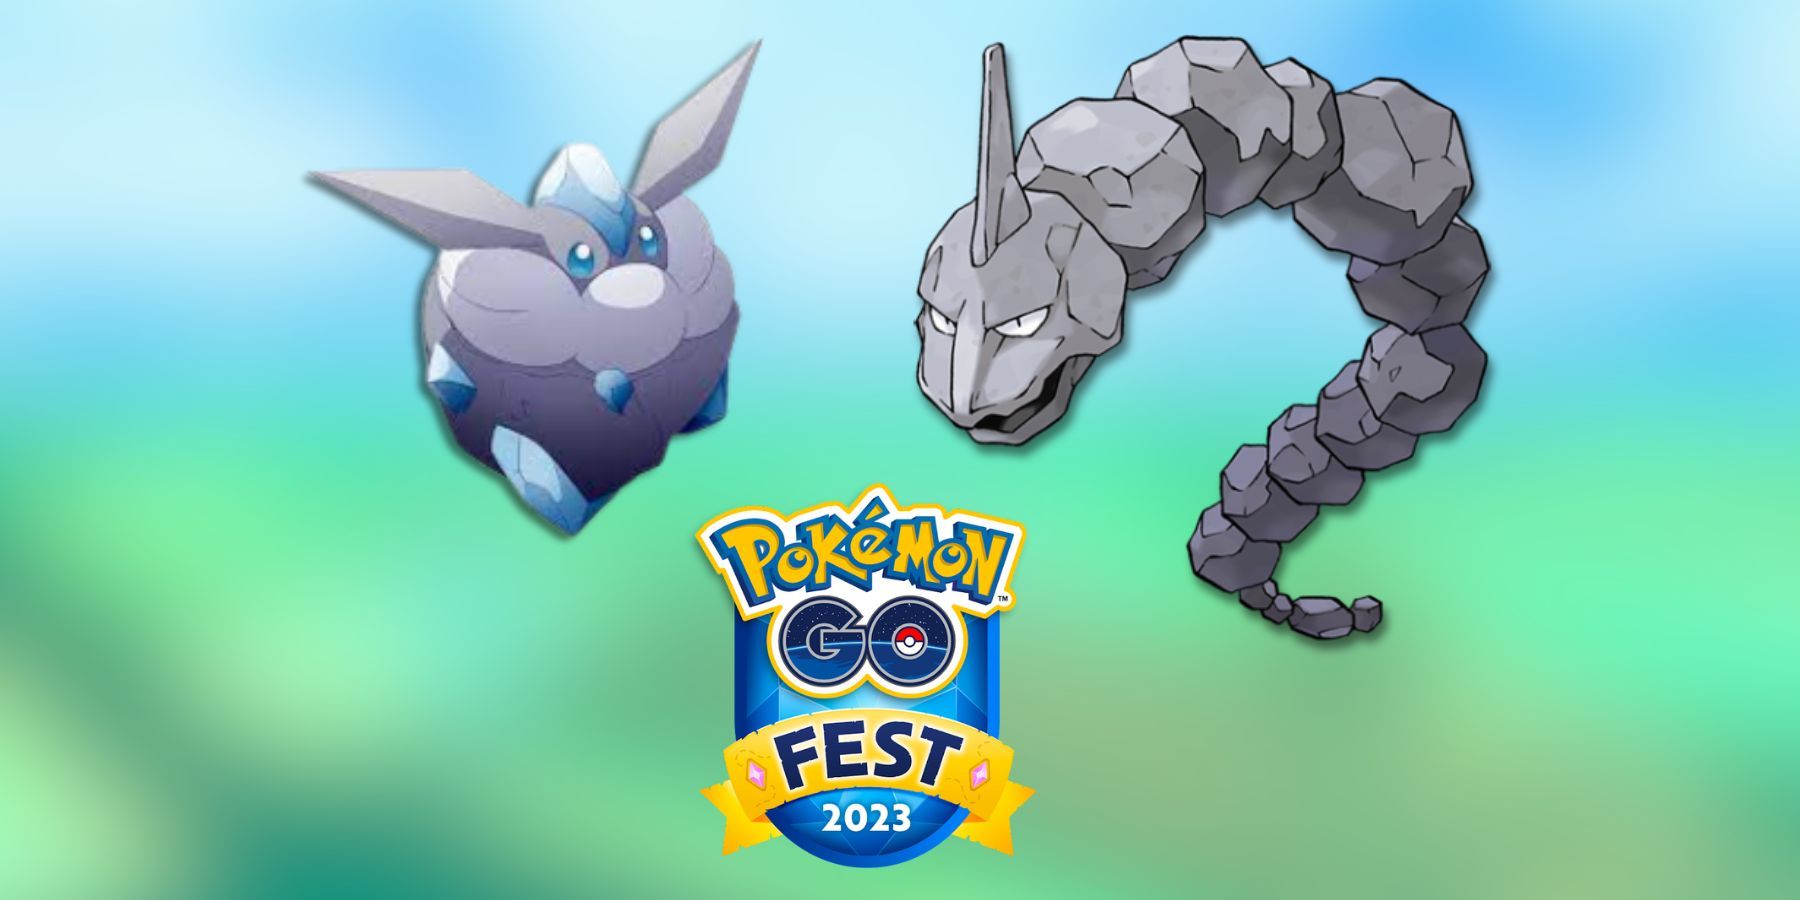 global go fest 2023 research